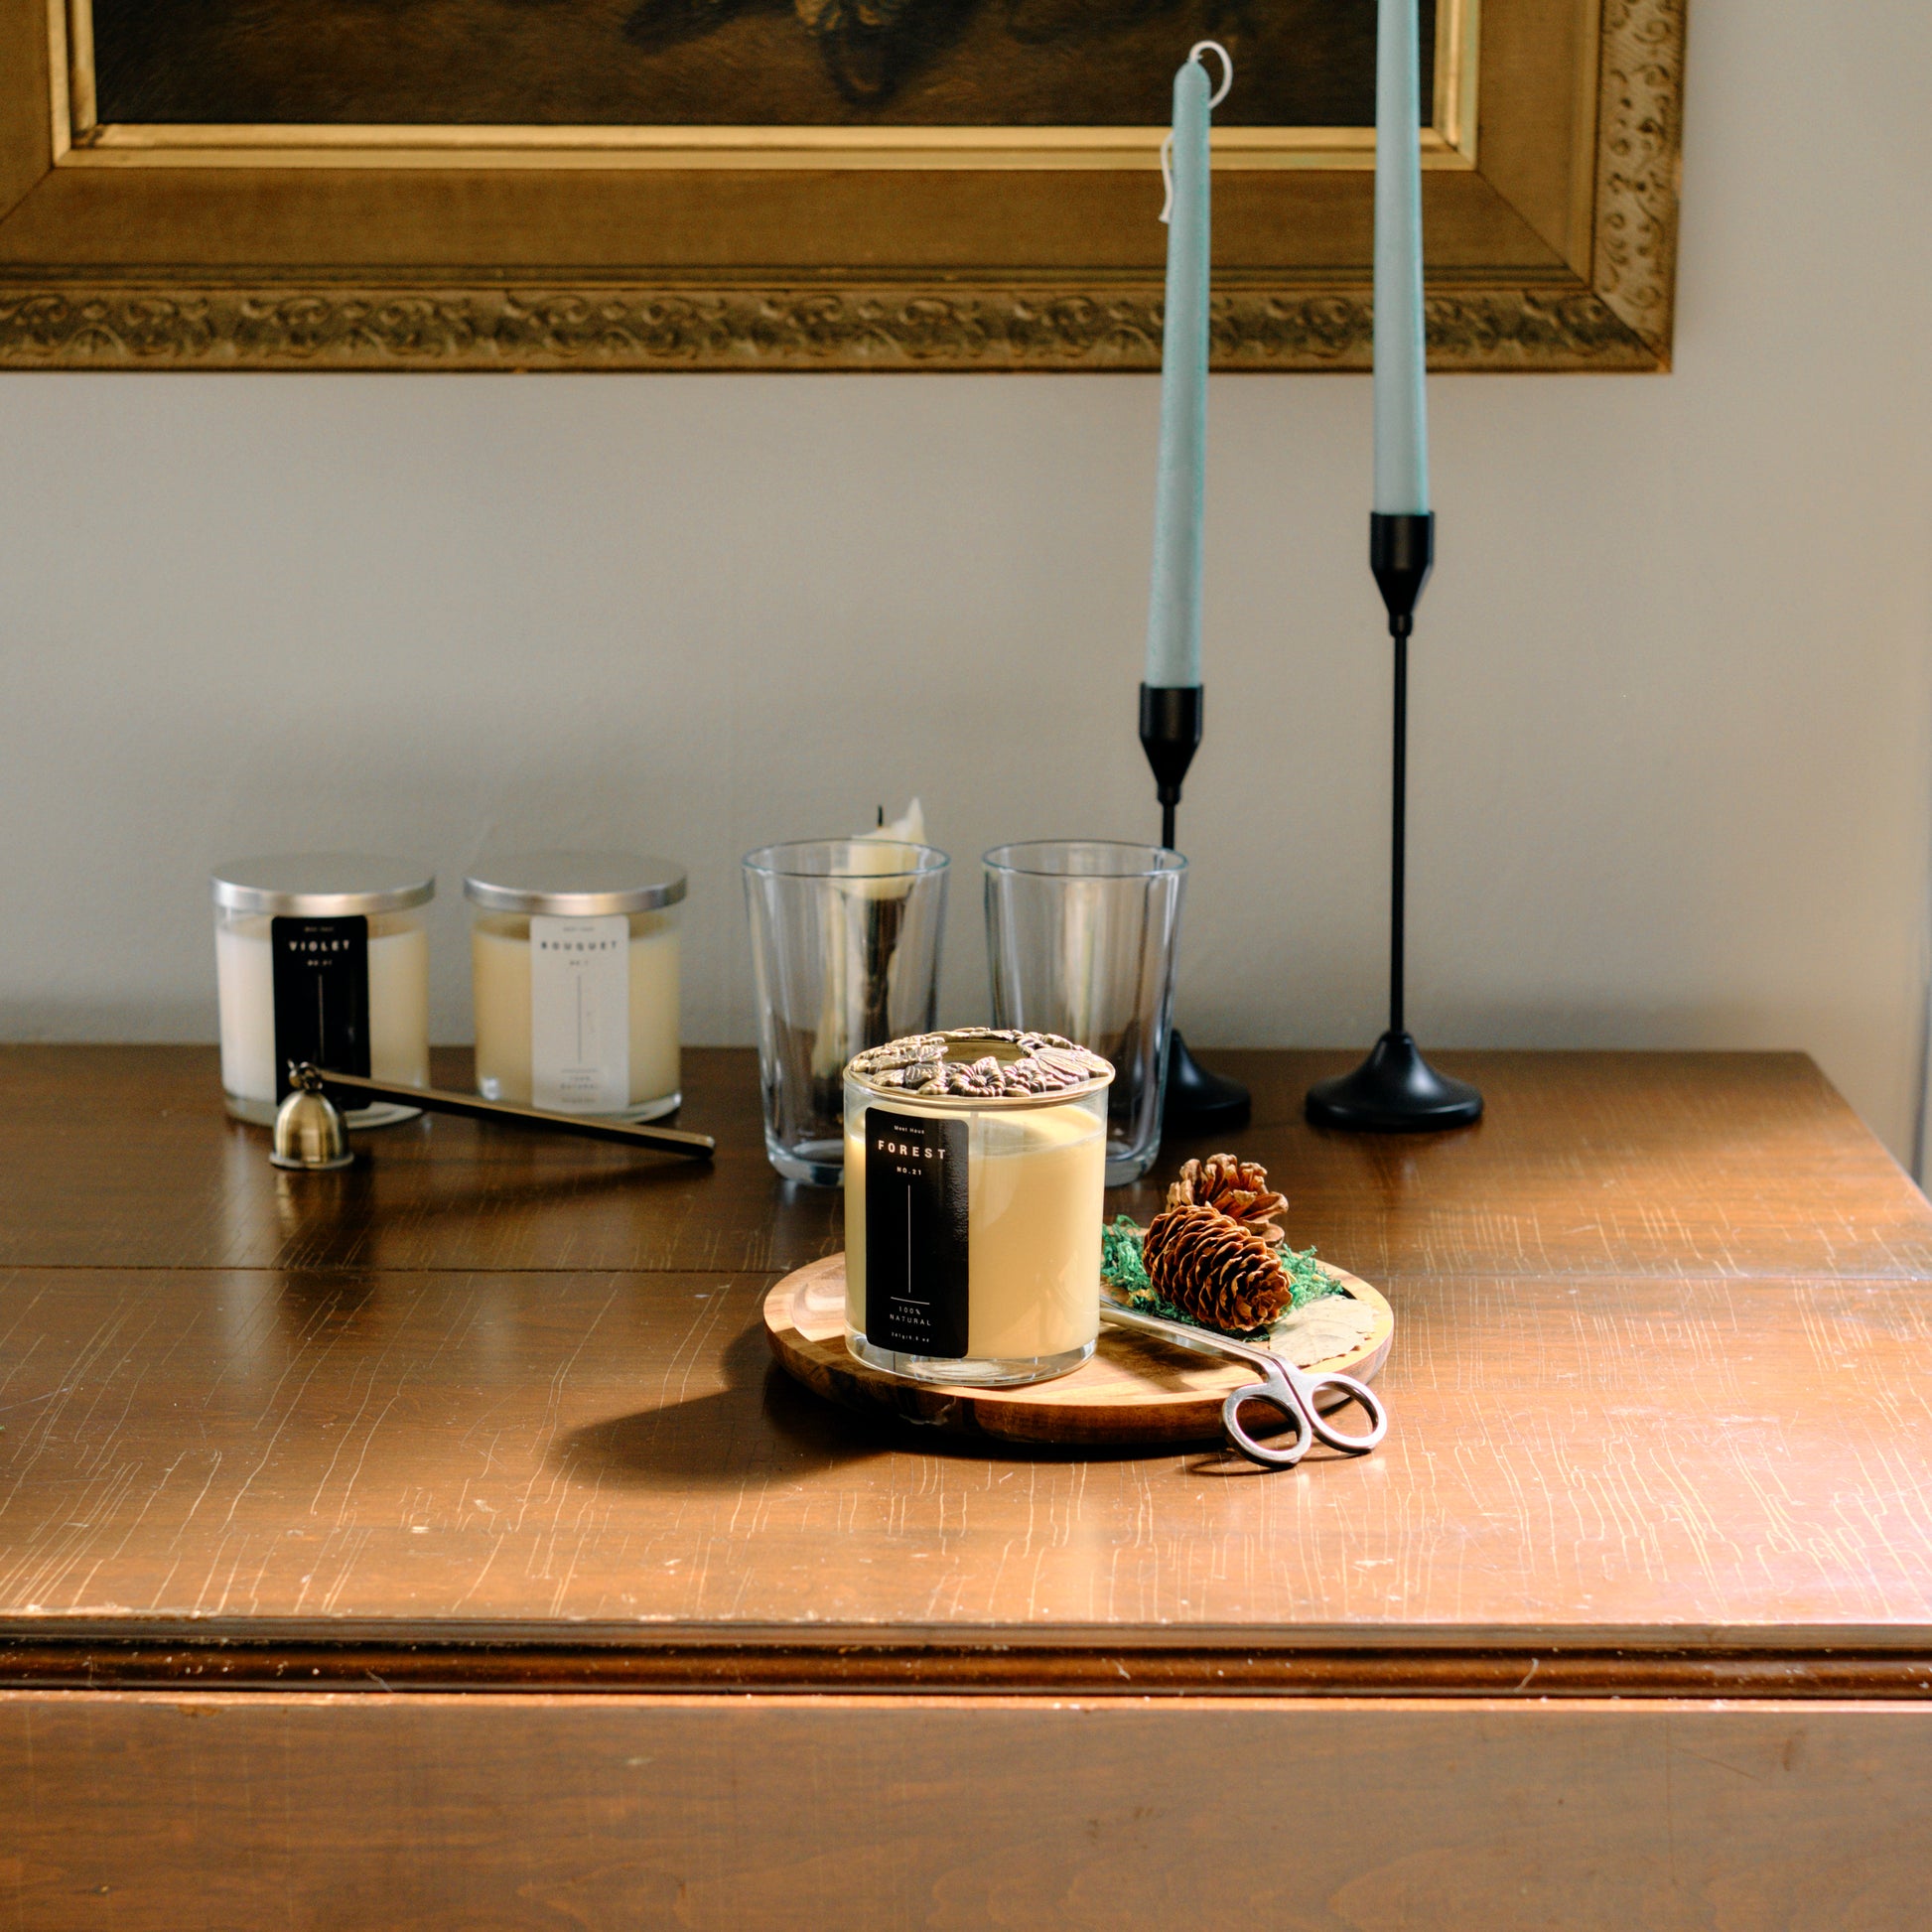 An array of Meet Haus candles on an antique table, featuring the prominent Forest candle with pine cones and scissors, flanked by elegant tall candlesticks and a decorative frame in the background.